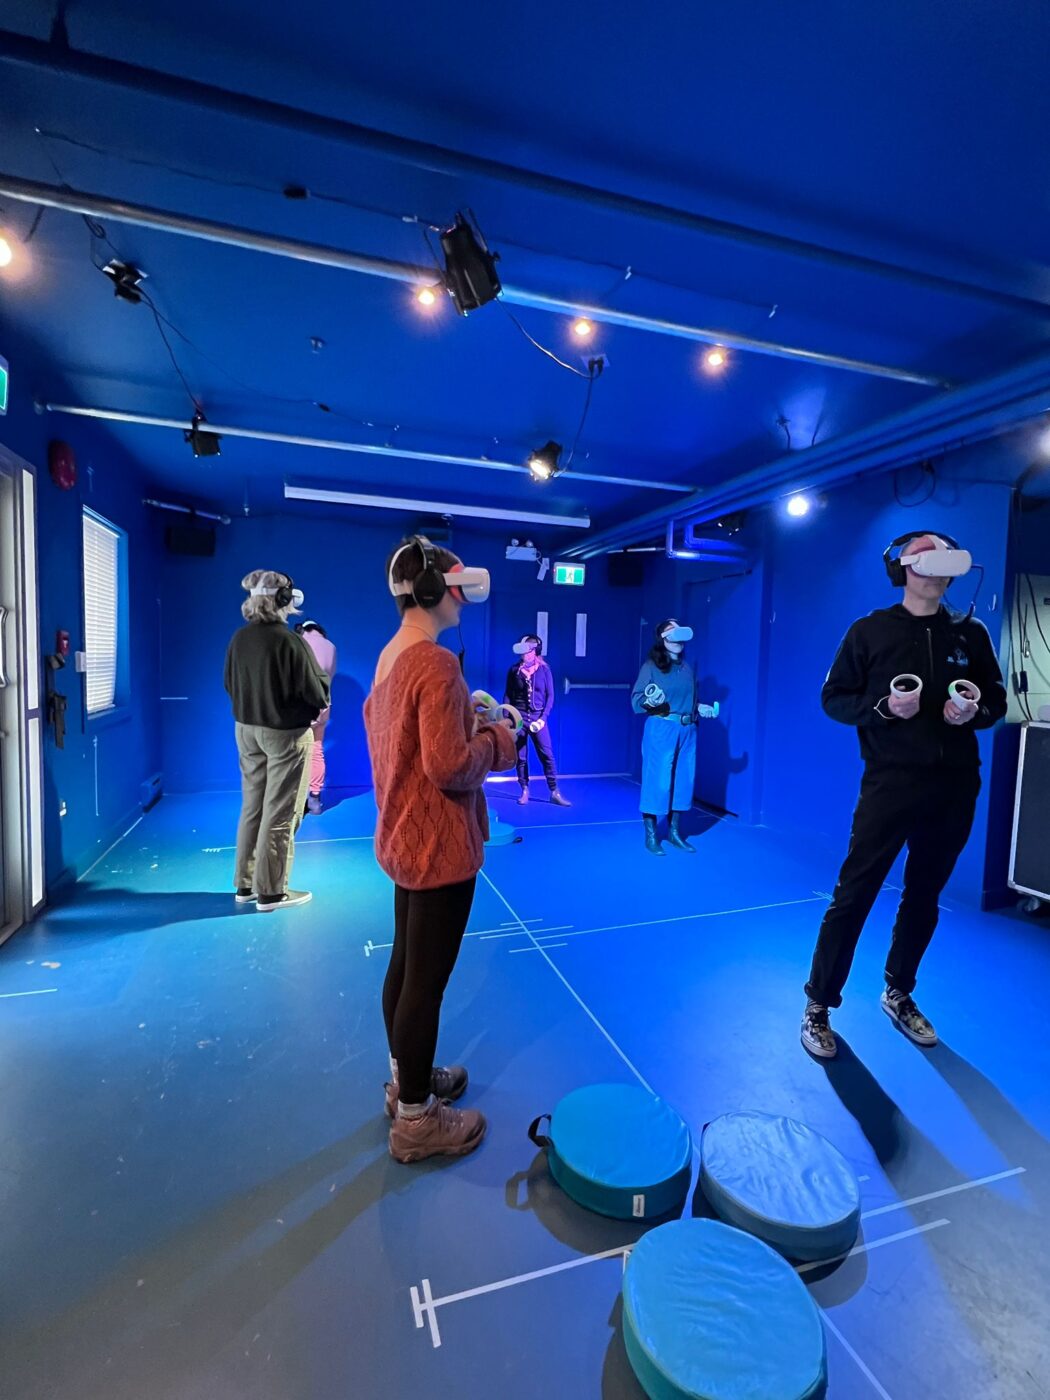 A crowd of 6 people stands in a blue room, each with a VR headset on and holding controllers, all looking in different directions.